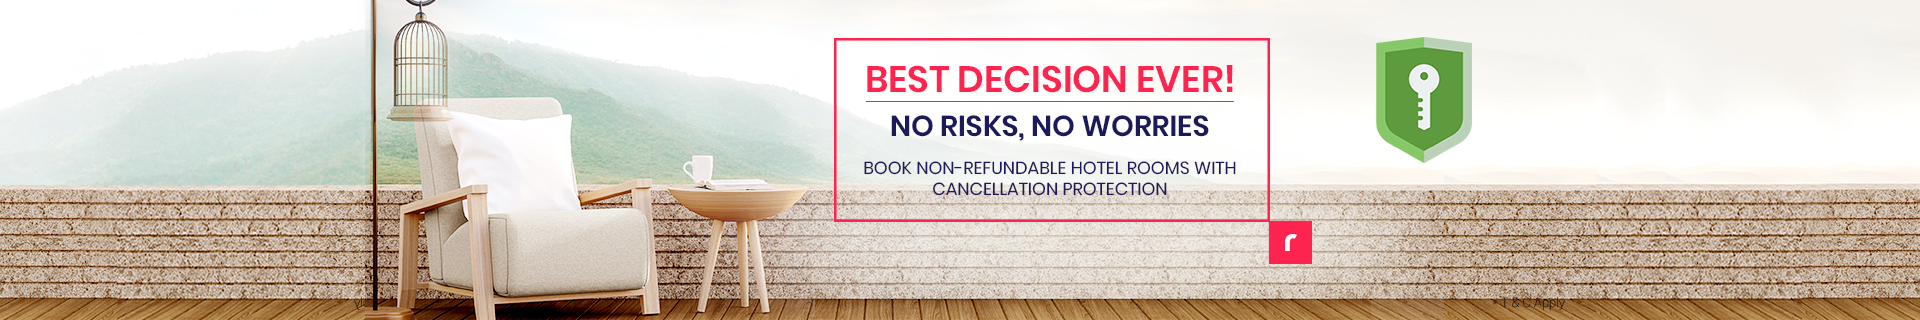 Cancellation Protection